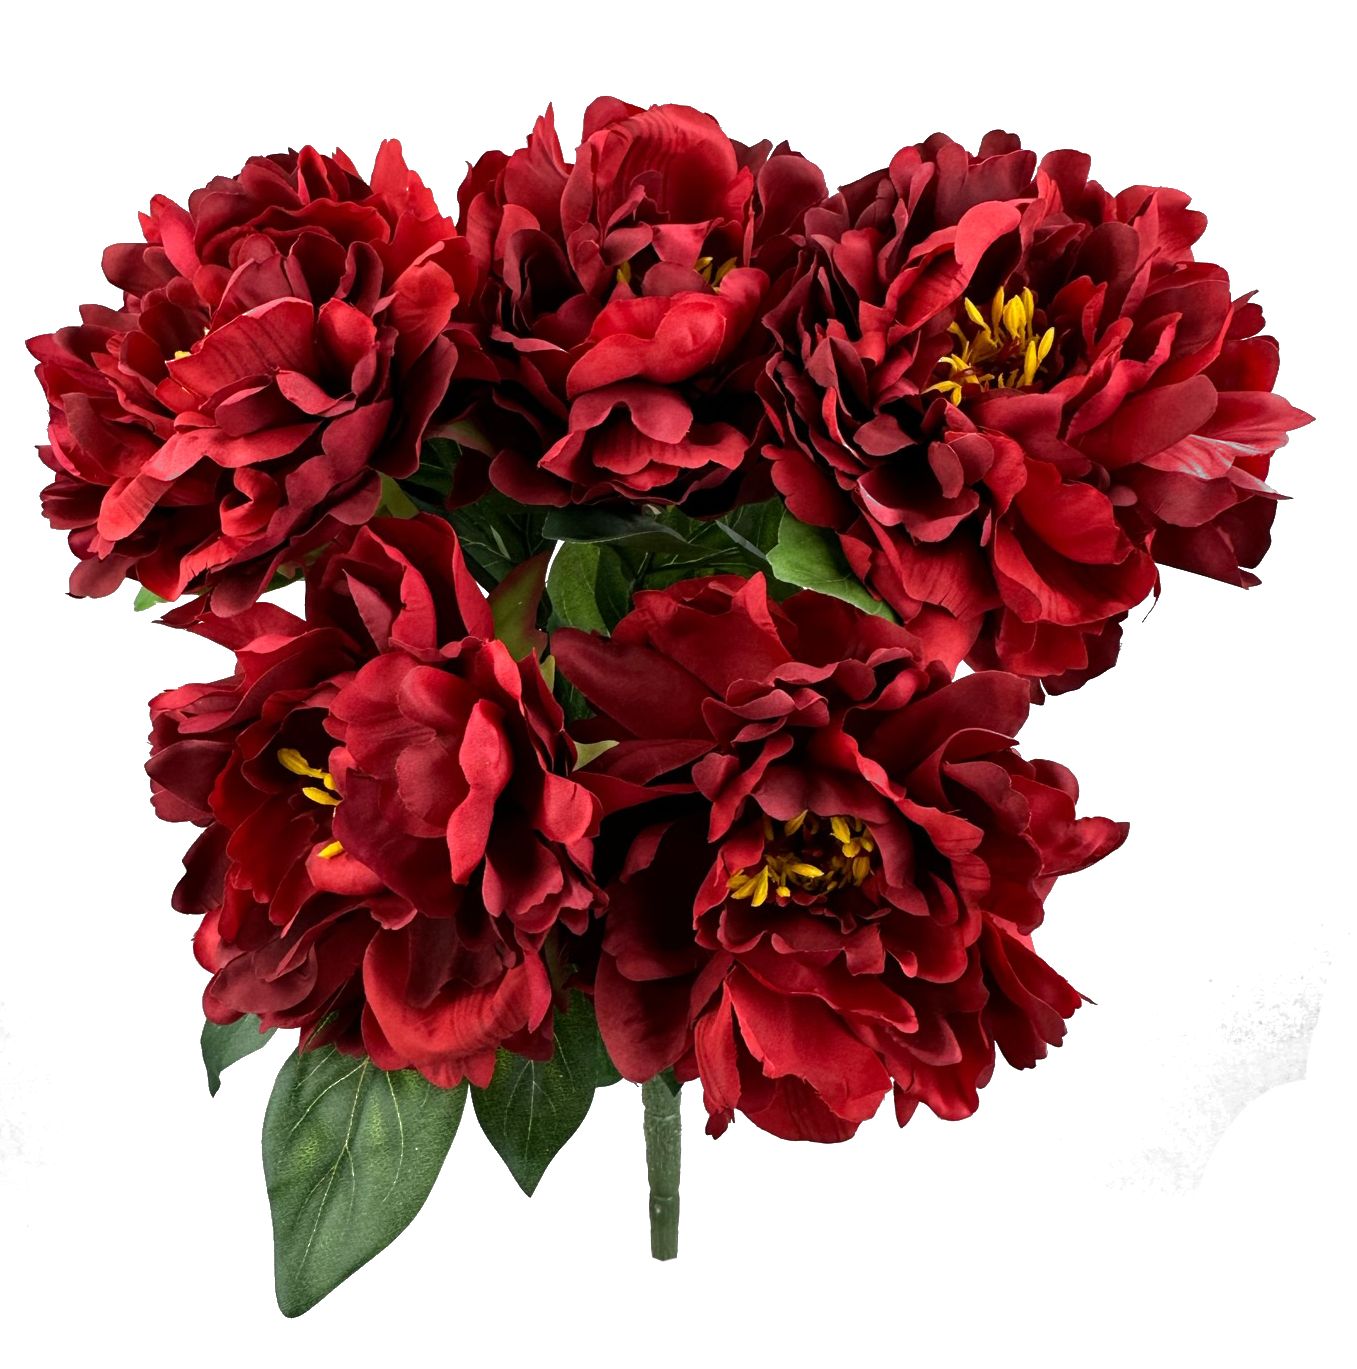 22 in Red Blooming Peony Bush x 6 - 30212RD